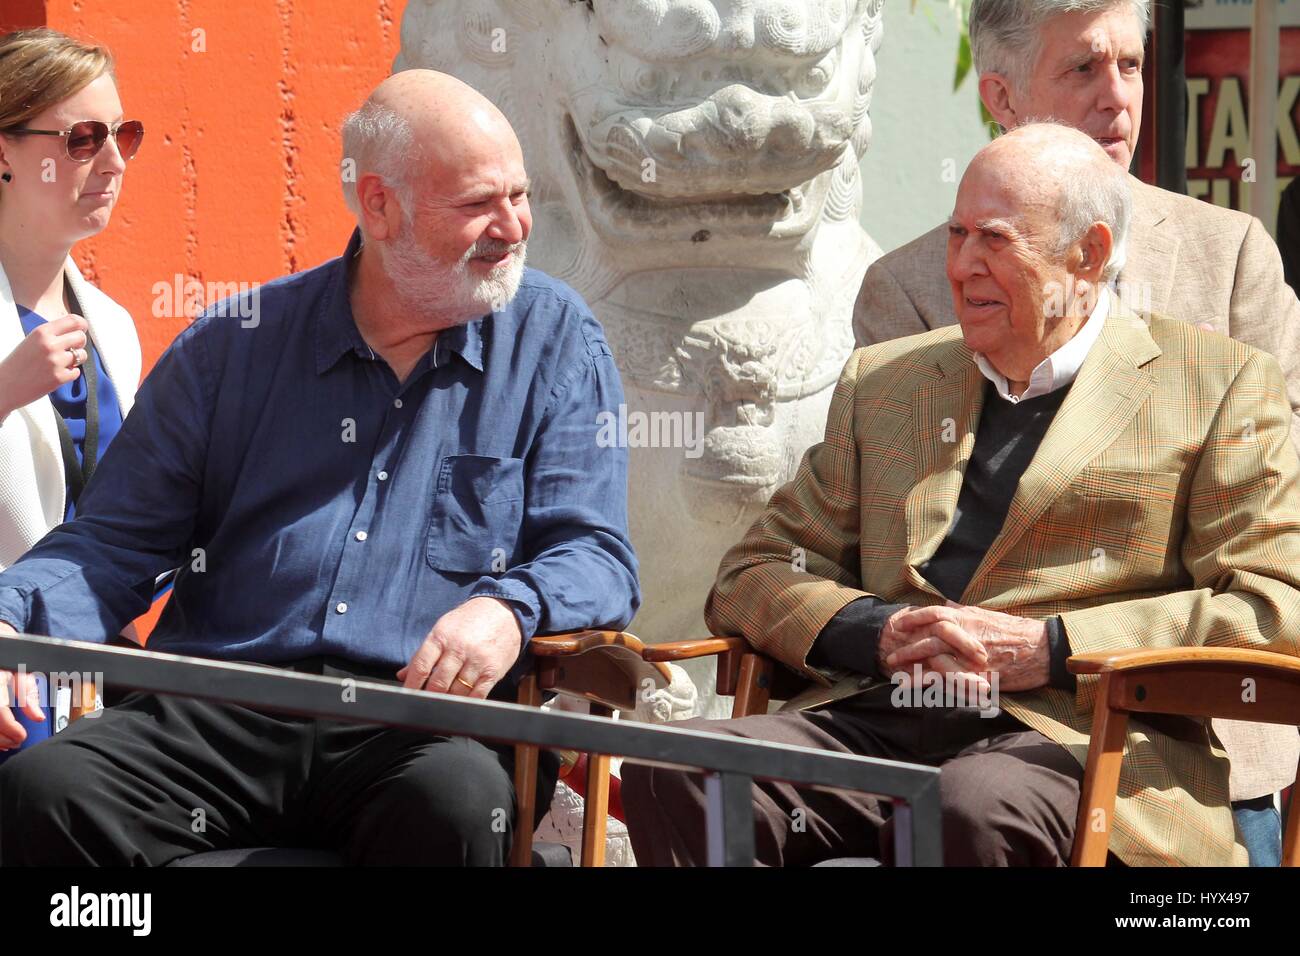 Hollywood, Ca. 7th Apr, 2017. Rob Reiner, Carl Reiner pictured at the Father and Son Hand and Foot Print Ceremony for Carl Reiner and Rob Reiner at the TCL Chinese Theater in Hollywood, California on April 7, 2017. Credit: David Edwards/Media Punch/Alamy Live News Stock Photo